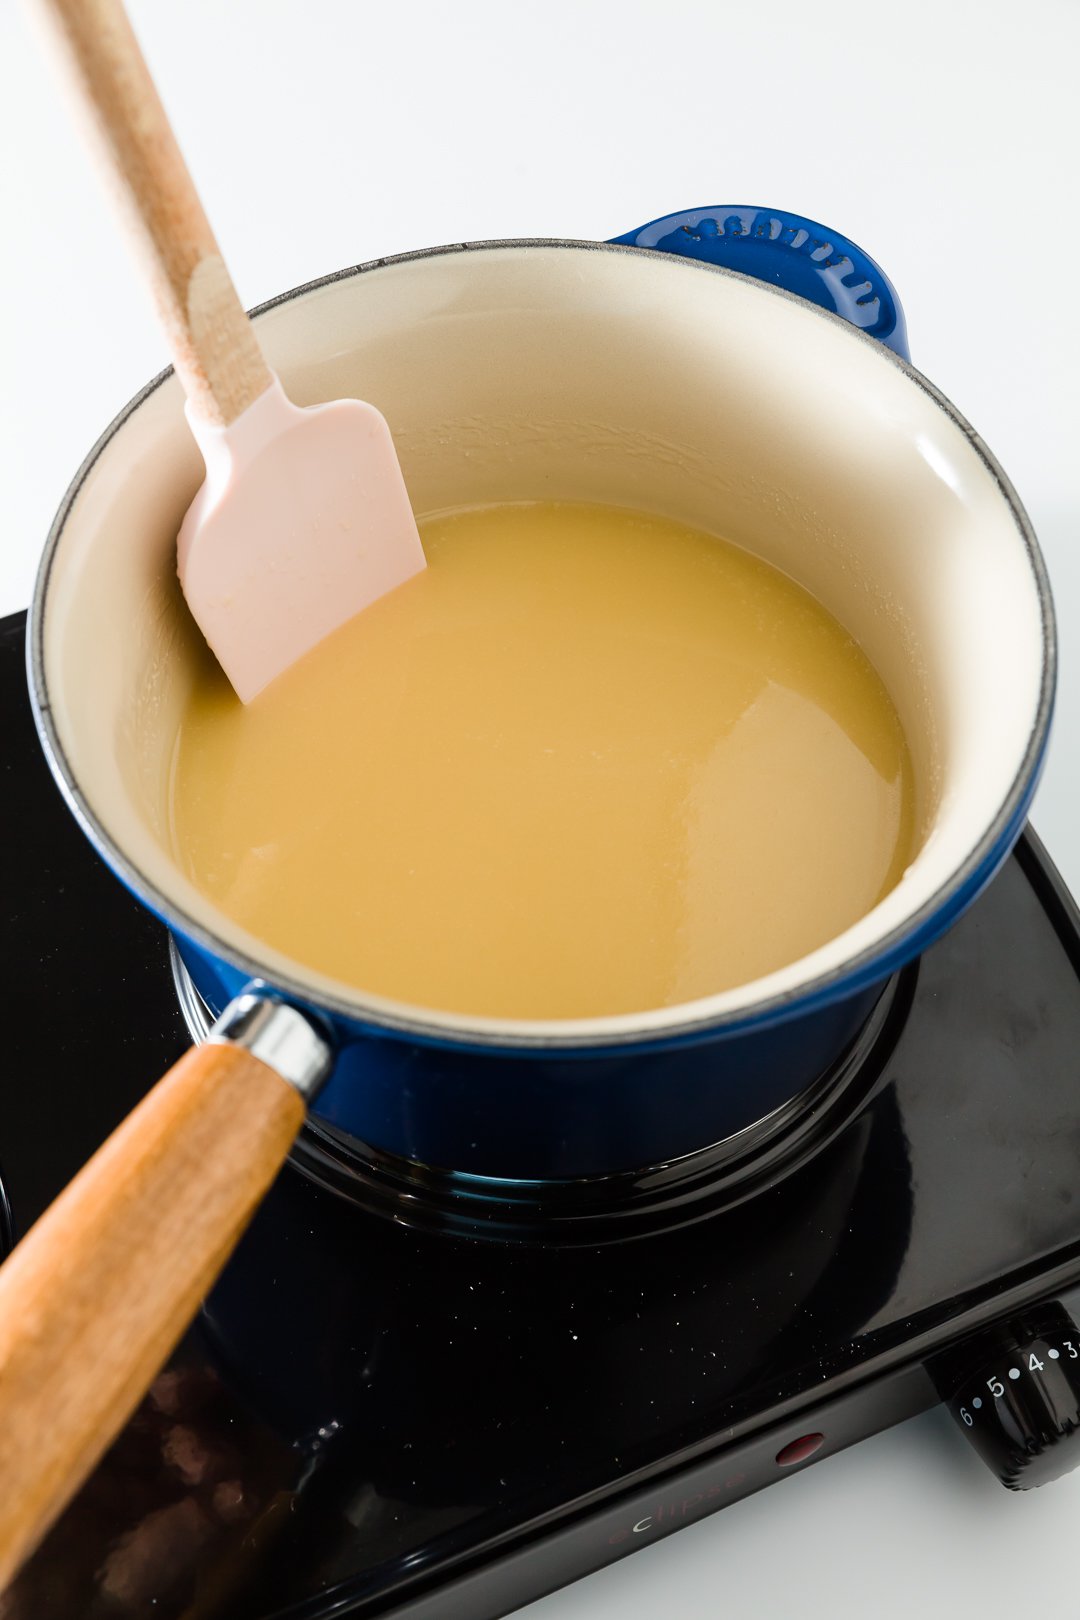 Butter, sugar, and evaporated milk melting in a saucepan